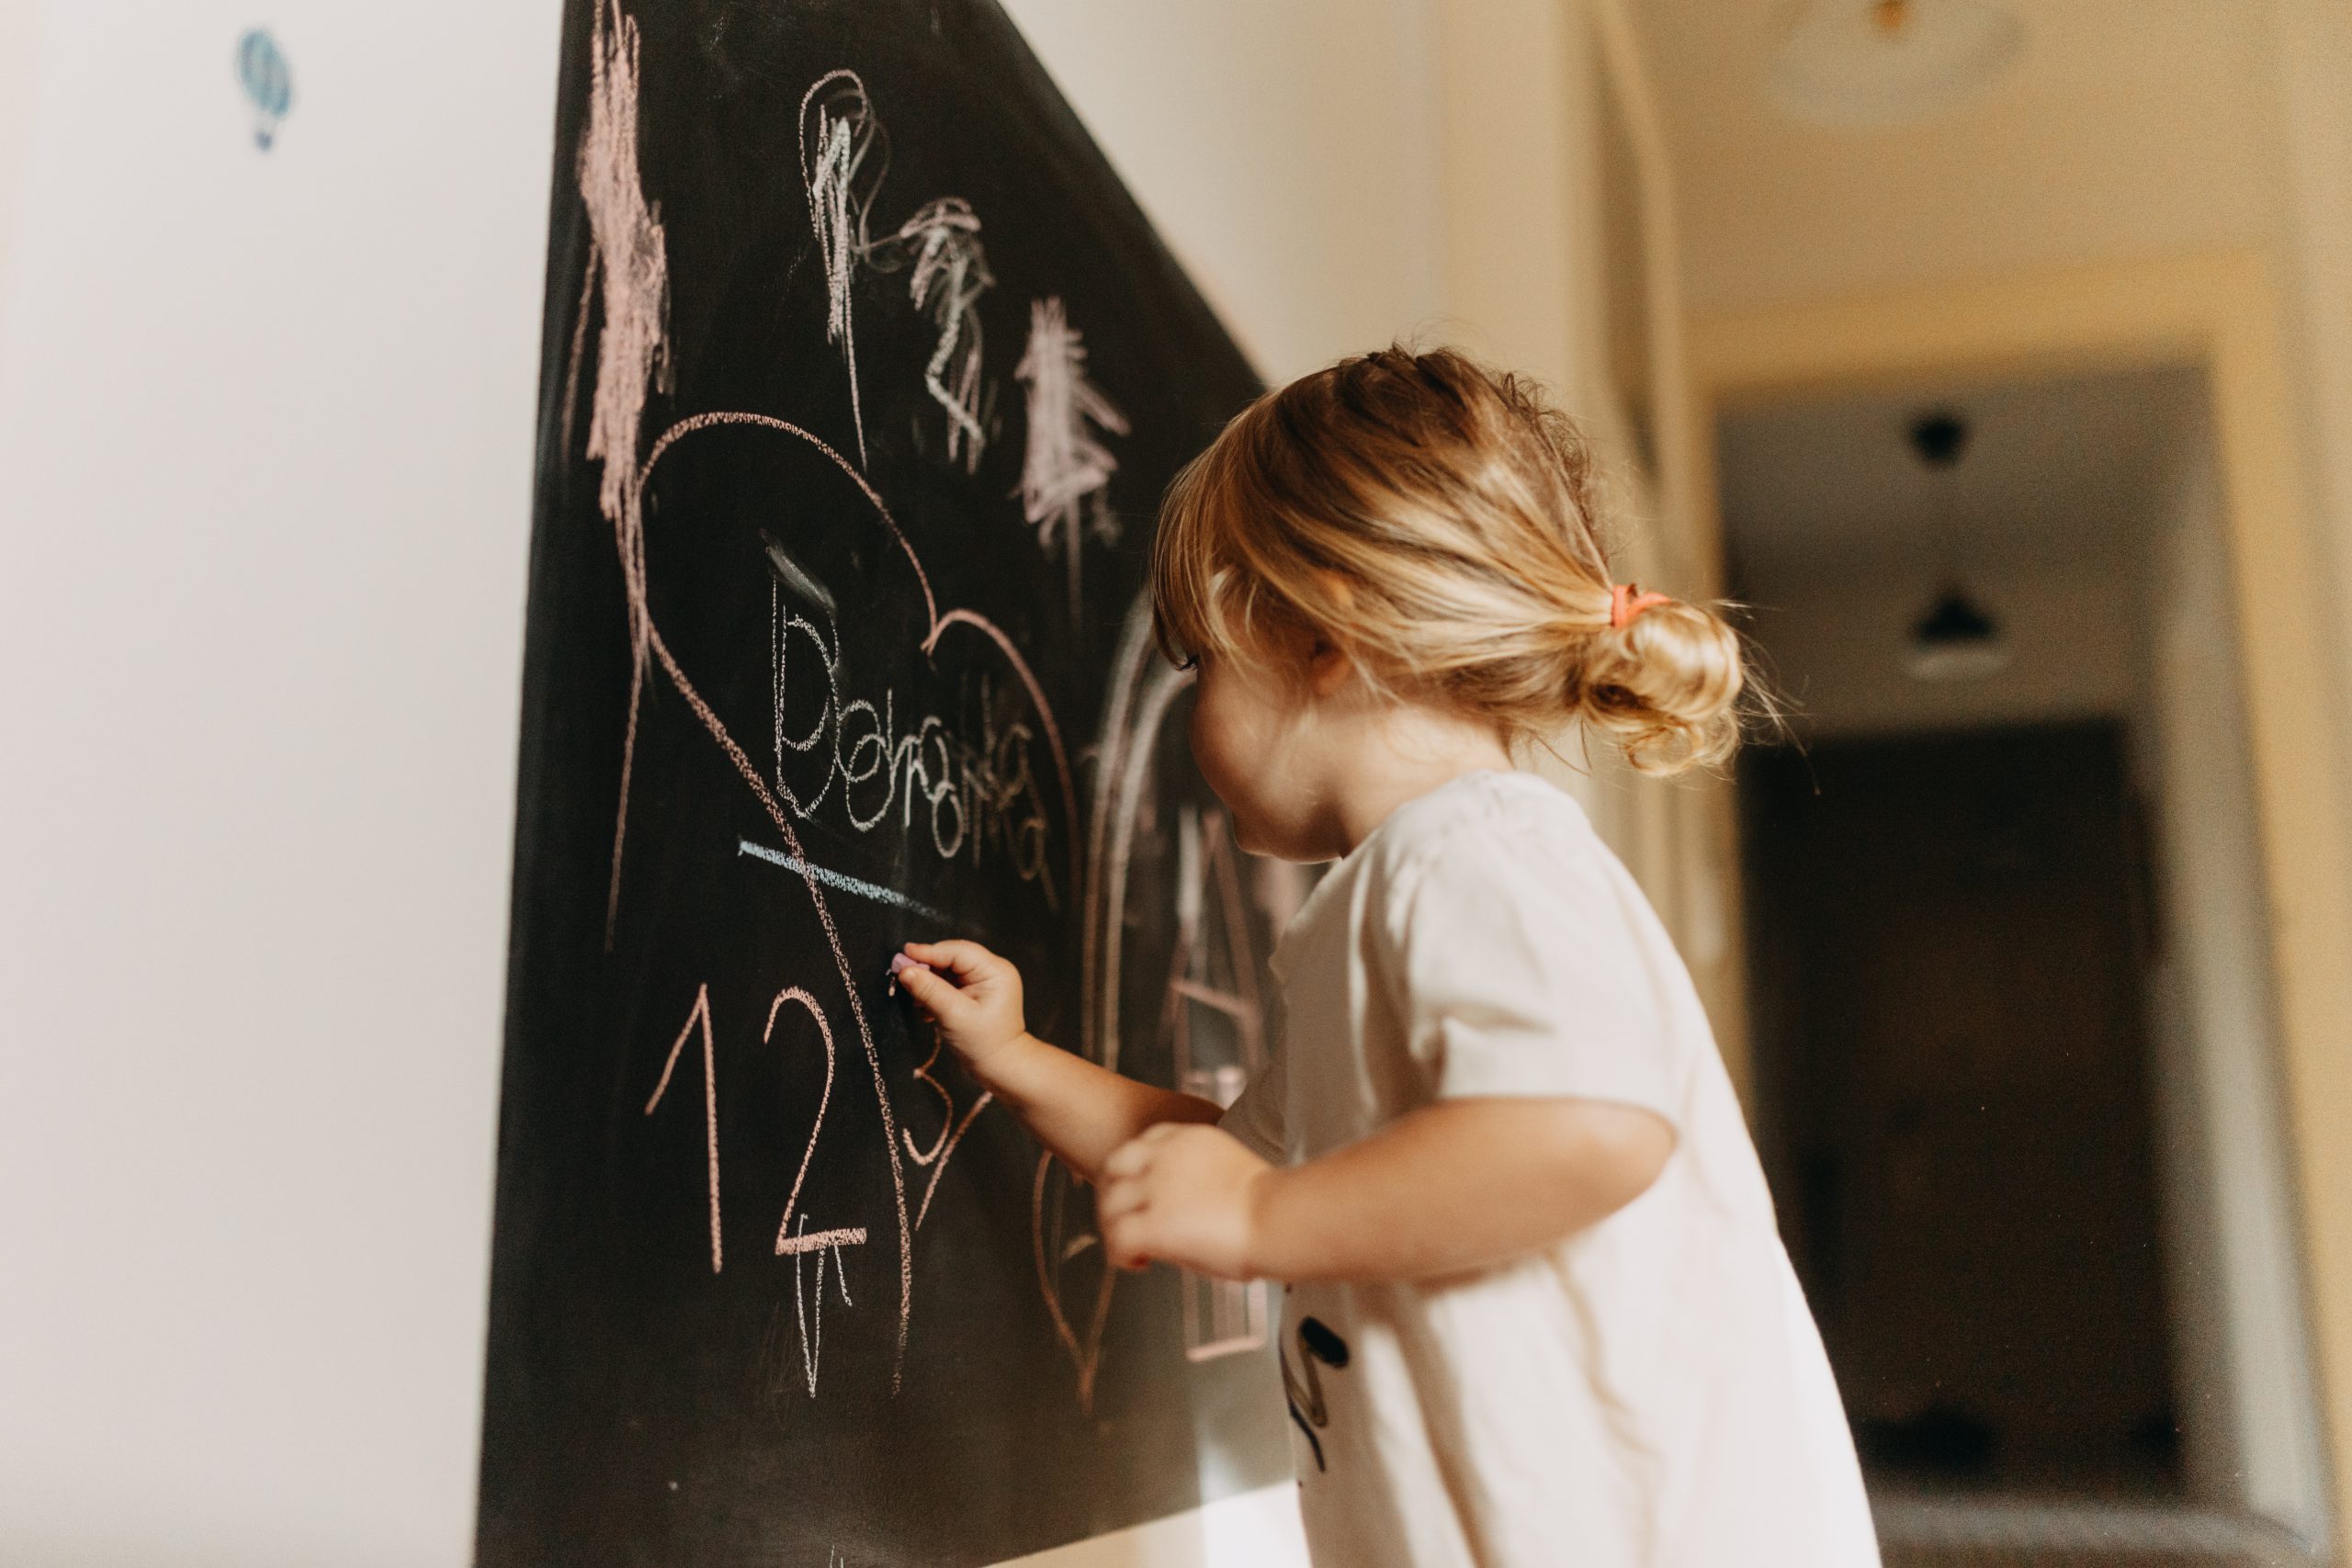 A Little Girl Drawing On A Chalkboard With Chalk.